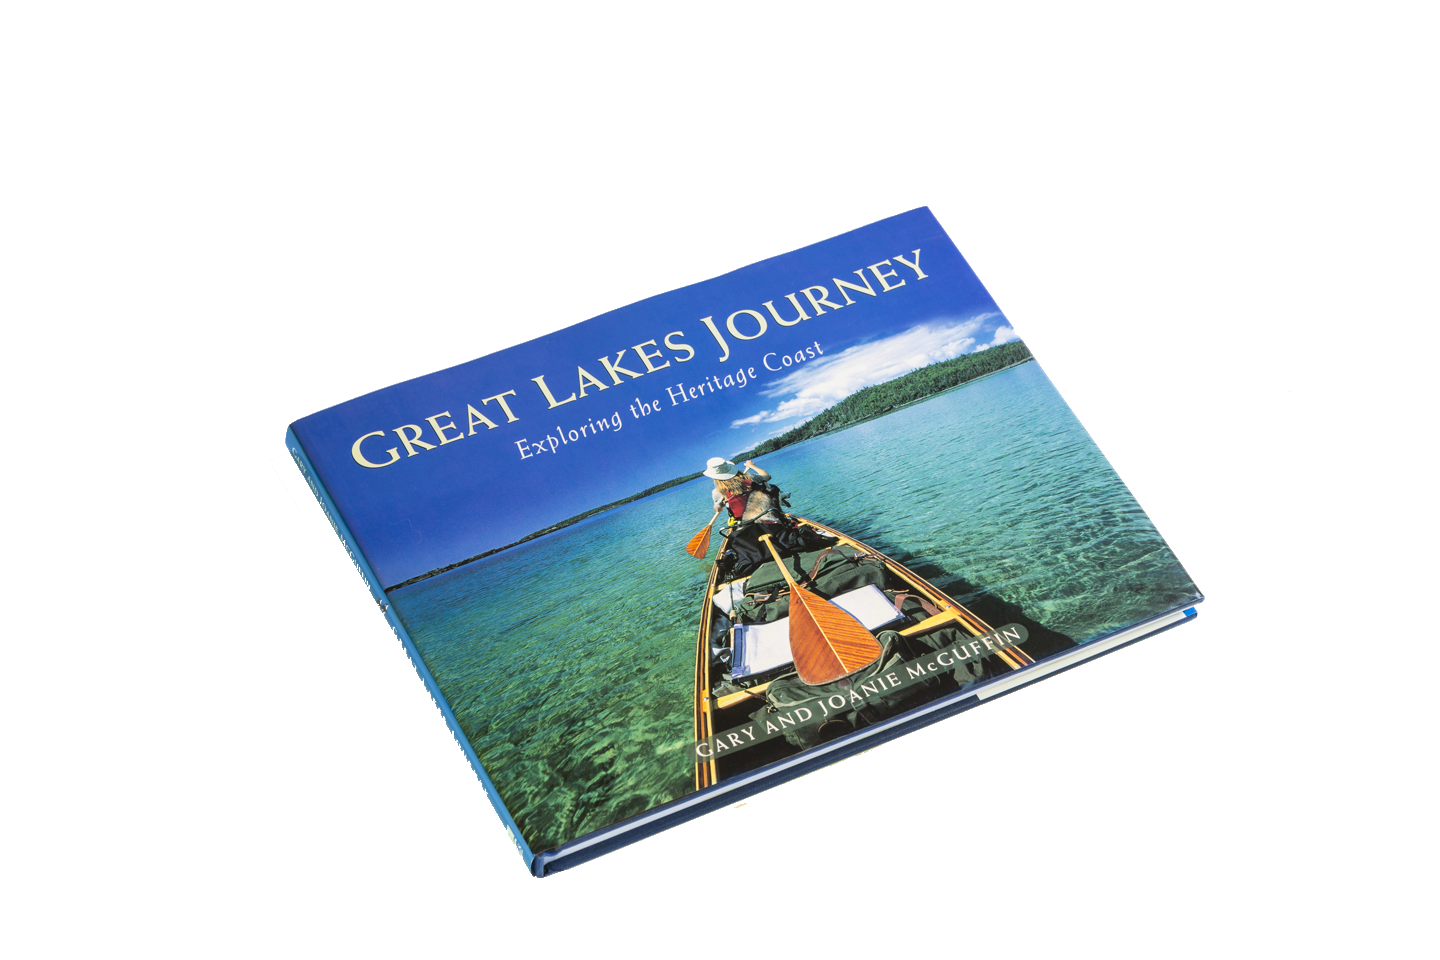 Book Cover of Great Lakes Journey Exploring the Heritage Coast